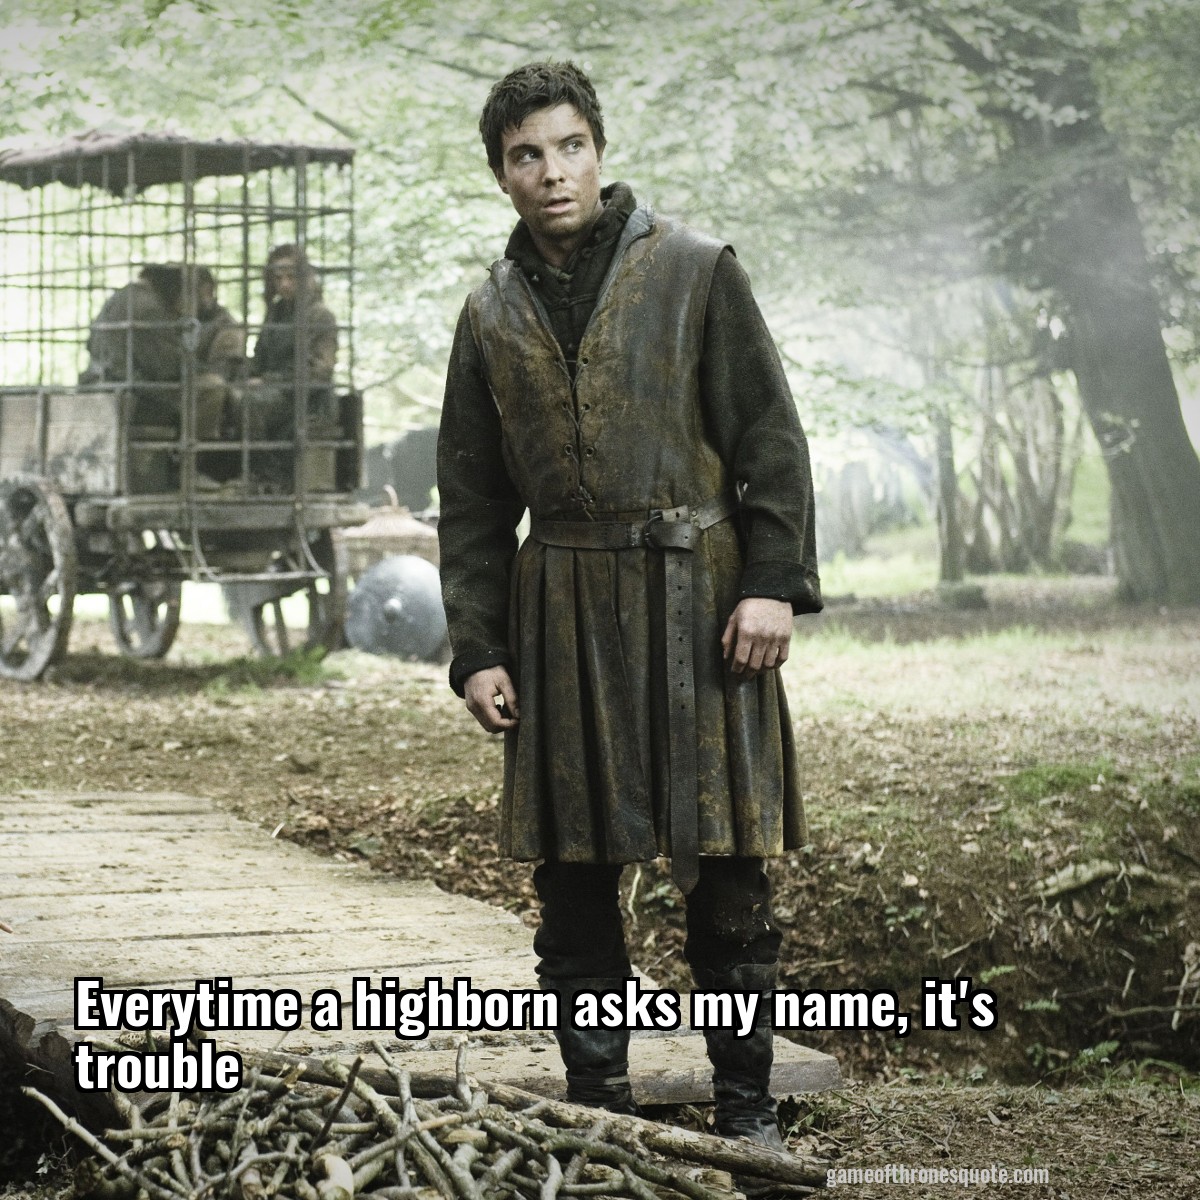 Everytime a highborn asks my name, it's trouble